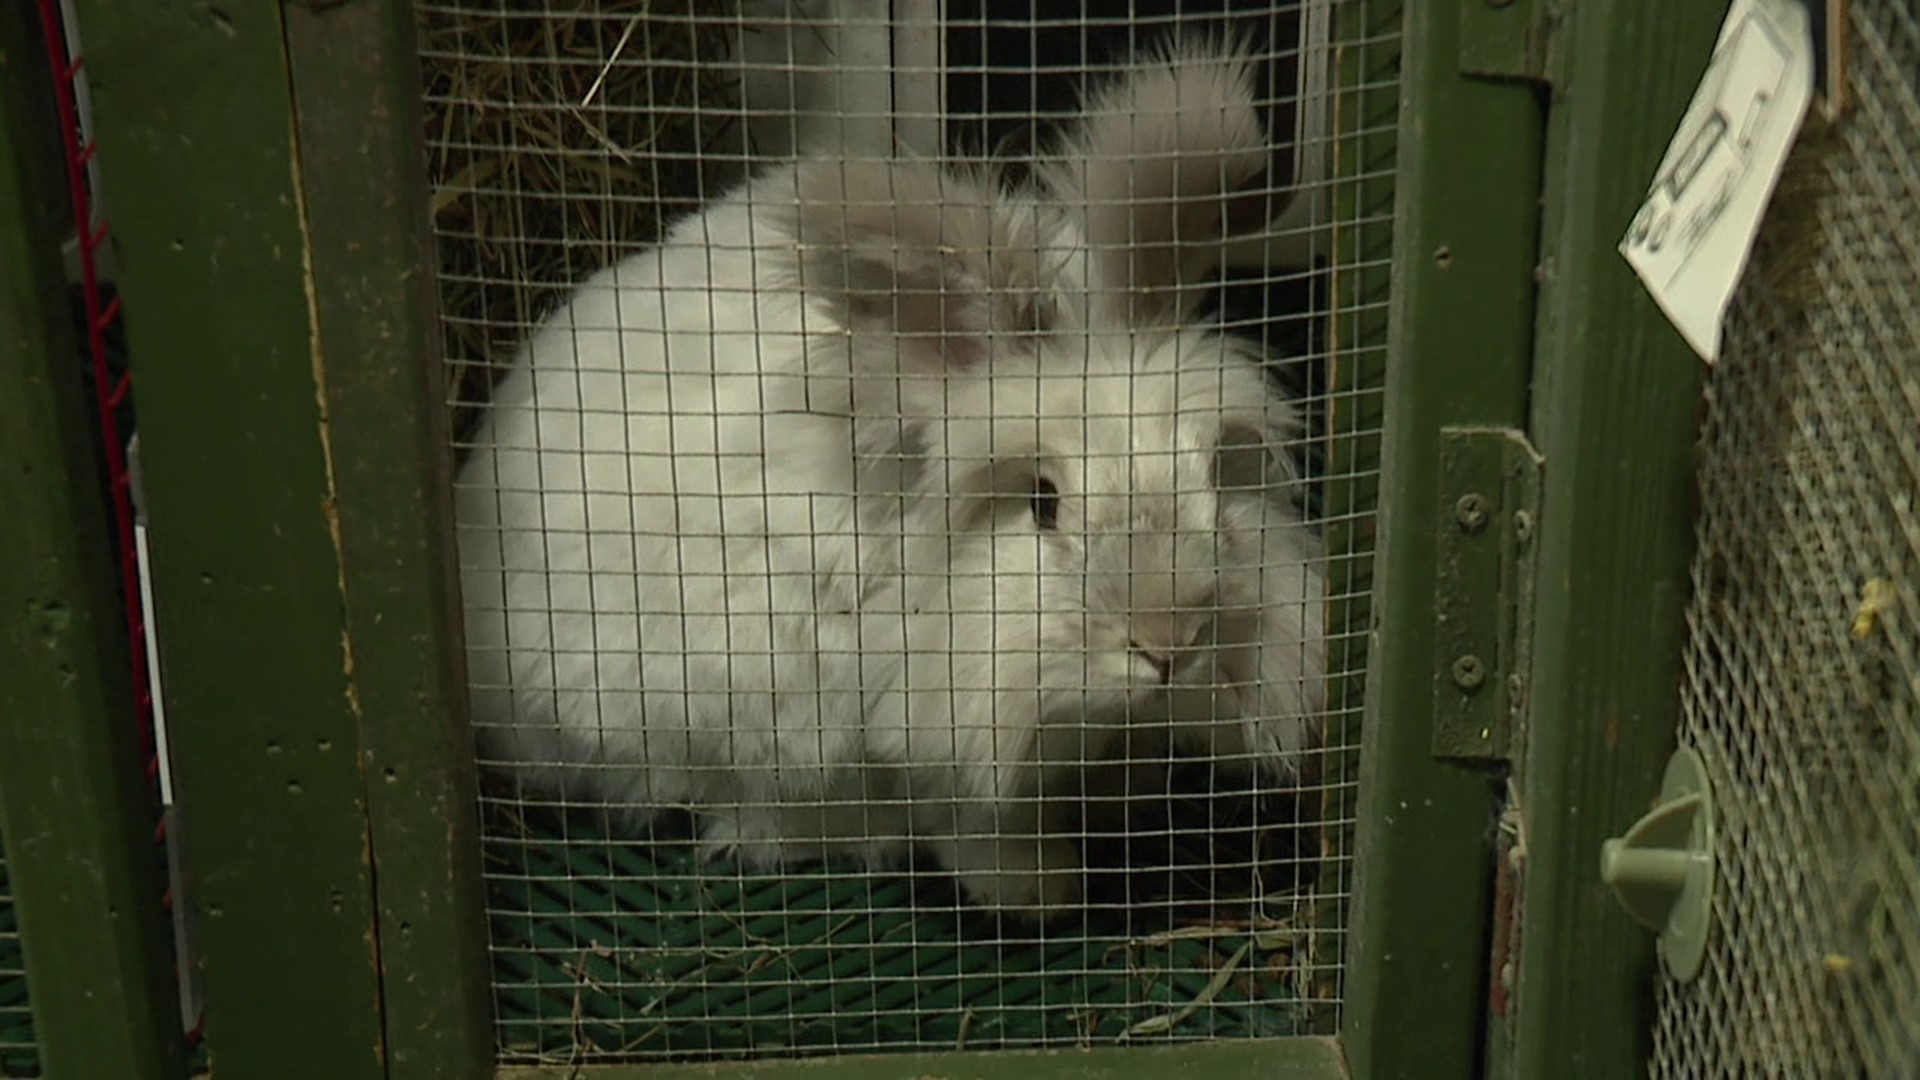 Blue Chip Farm Animal Refuge already has its hands full with dogs, but this time of year, its attention turns to rabbits.